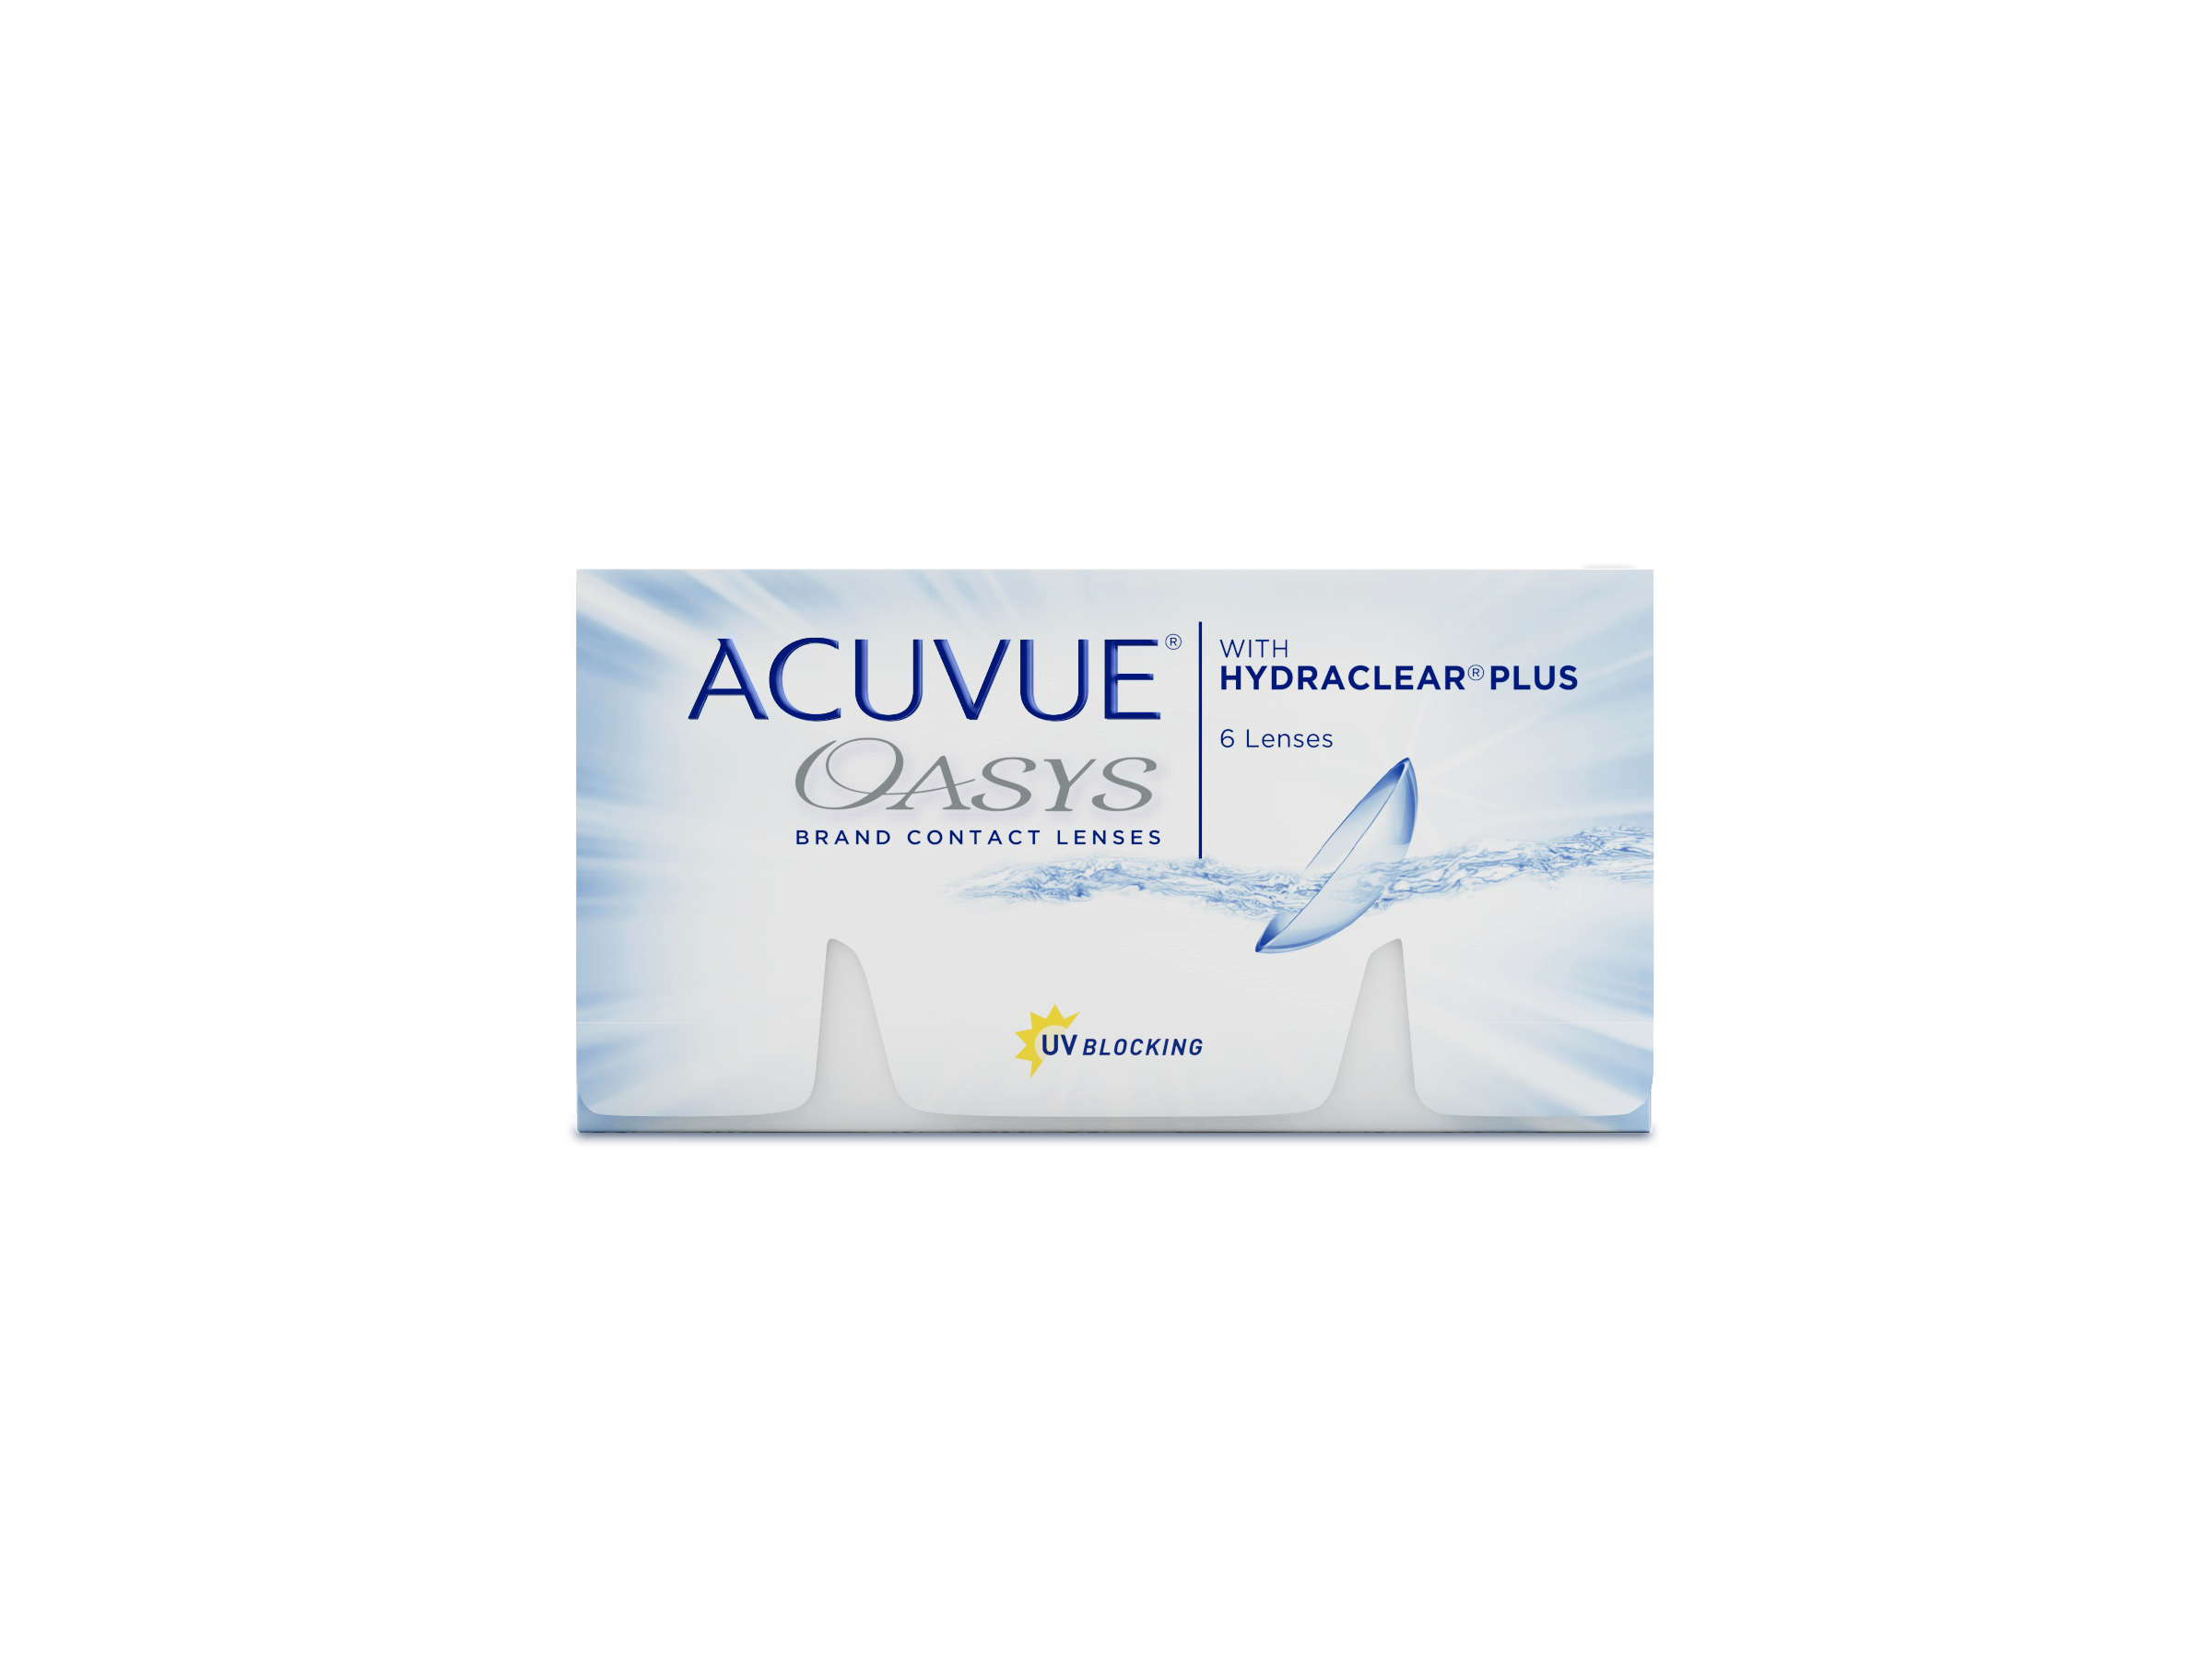 ACUVUE[^®] OASYS with HYDRACLEAR[^®] PLUS Technology